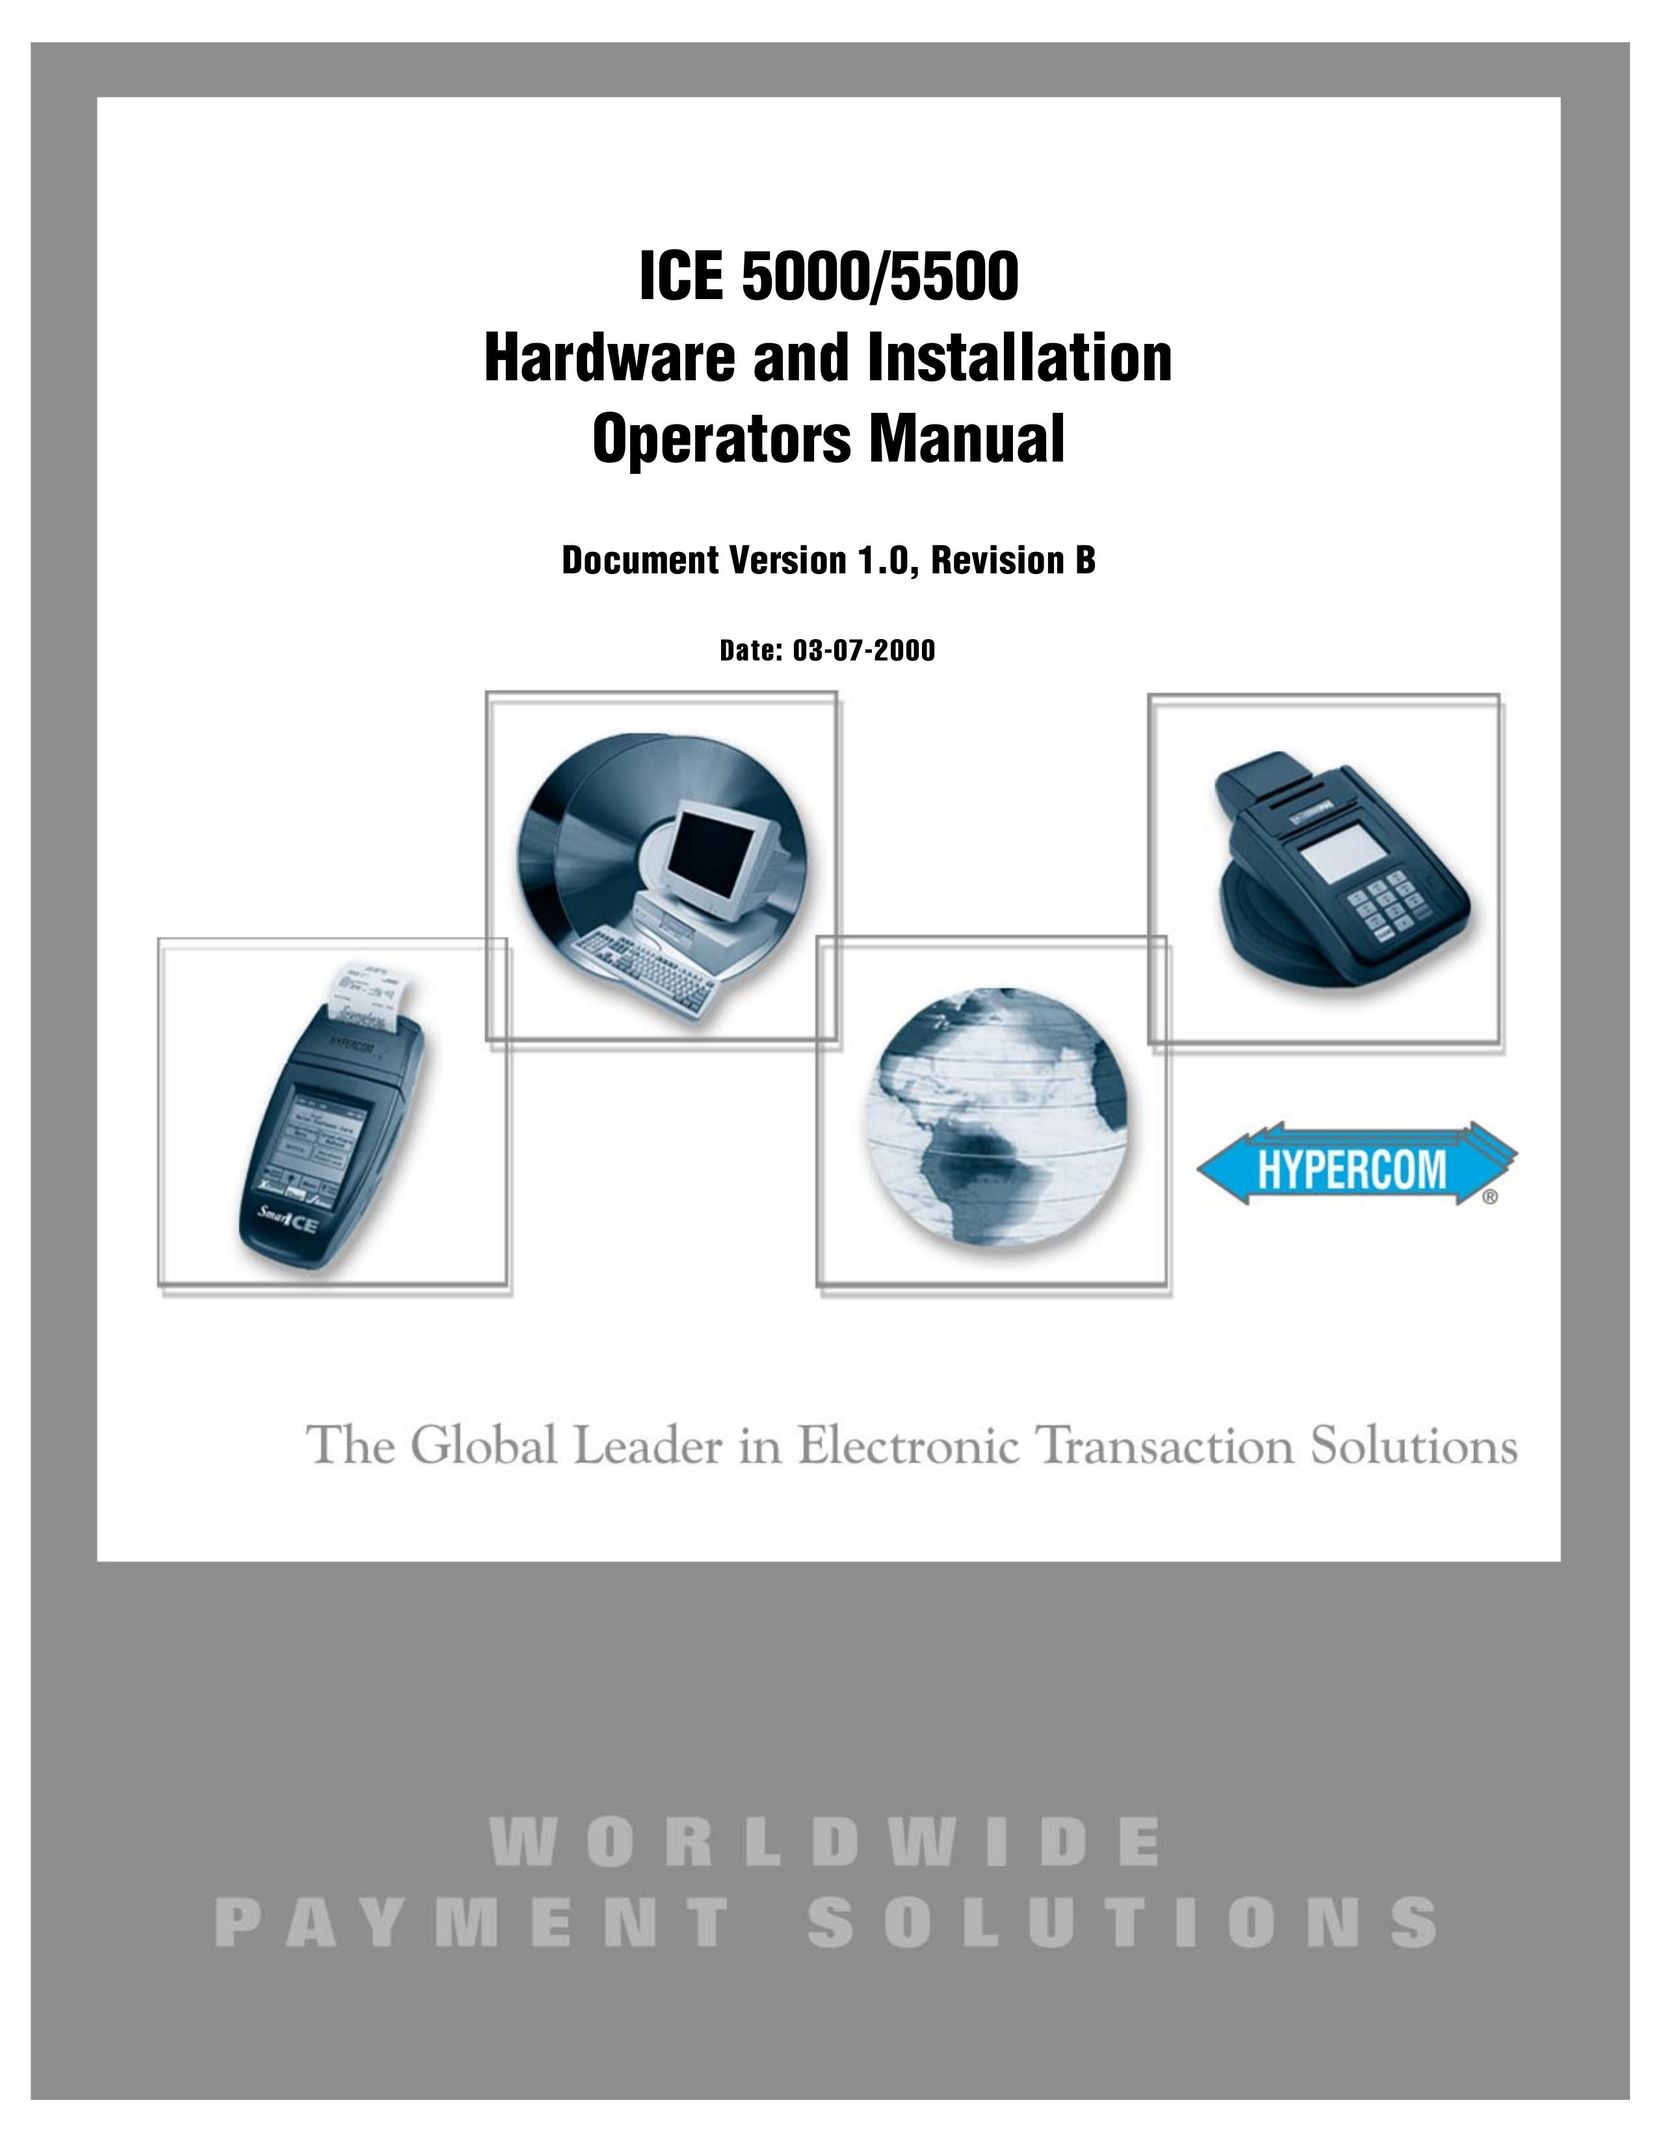 Hypercom ICE 5000 Network Router User Manual